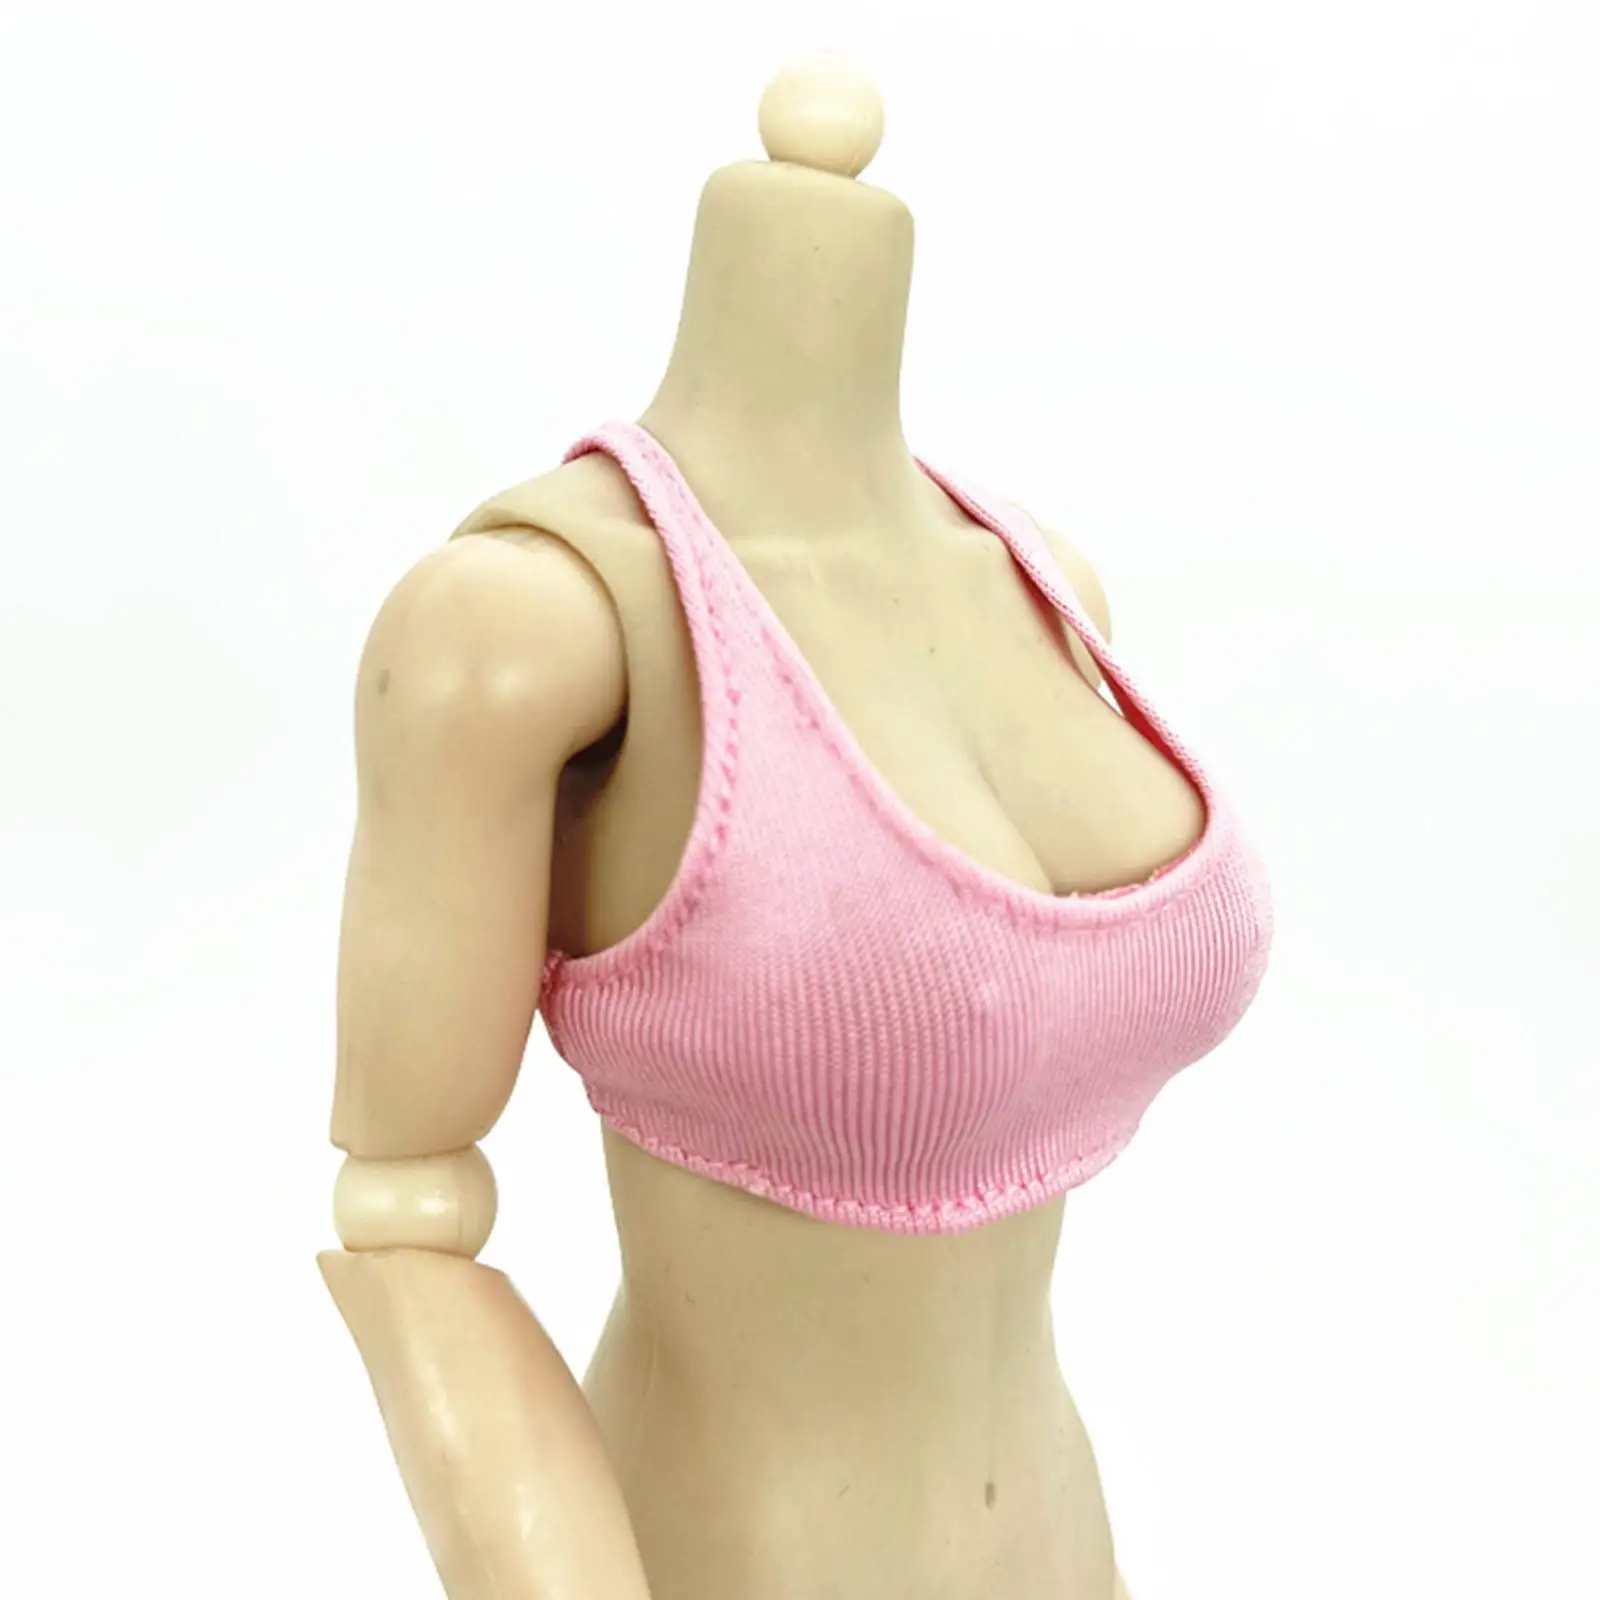 Fashion 1/6 Sport Vest Doll Clothes 5.5cm for 12 inch Female Figures Dress up Doll Model Accs